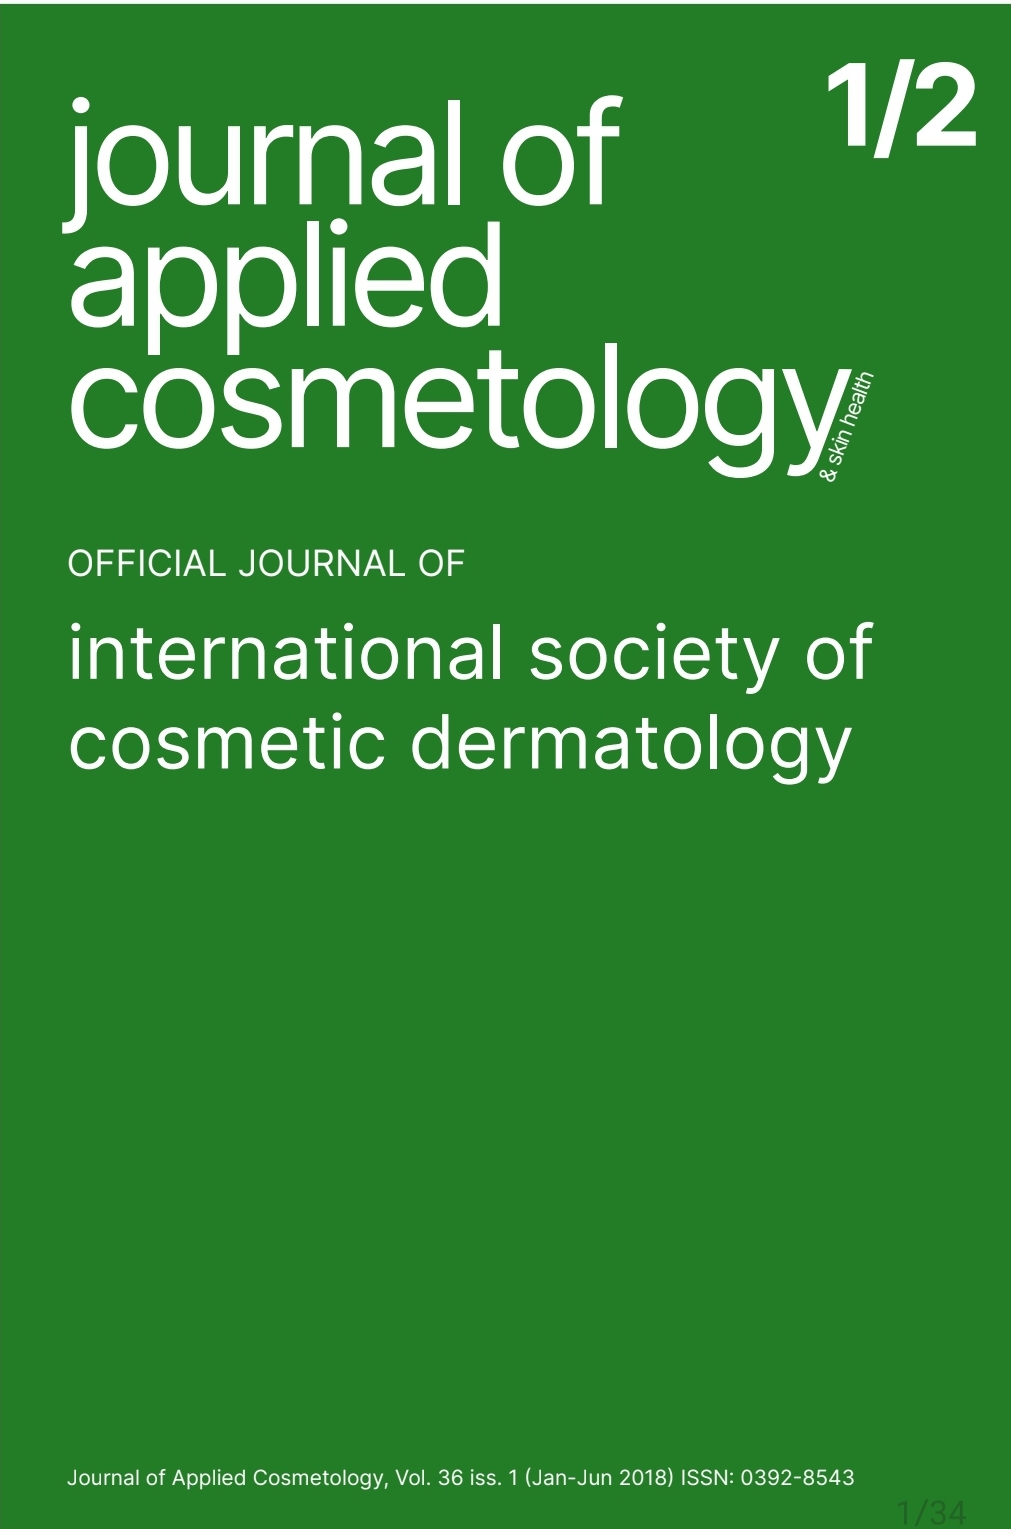 					View Vol. 36 No. 1 (2018): Journal of Applied Cosmetology
				